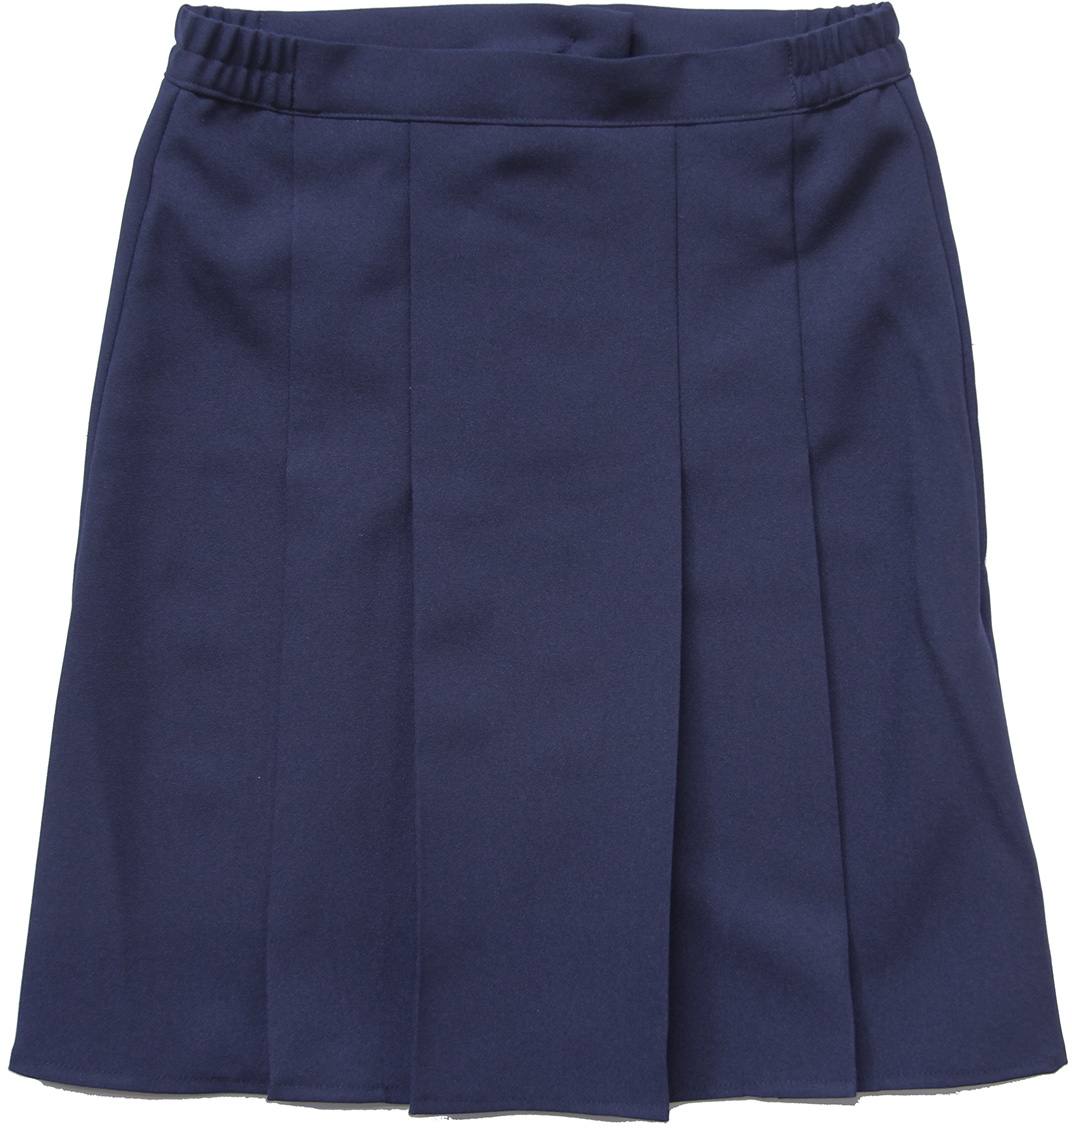 Partiotuote Scout skirt women’s sizes